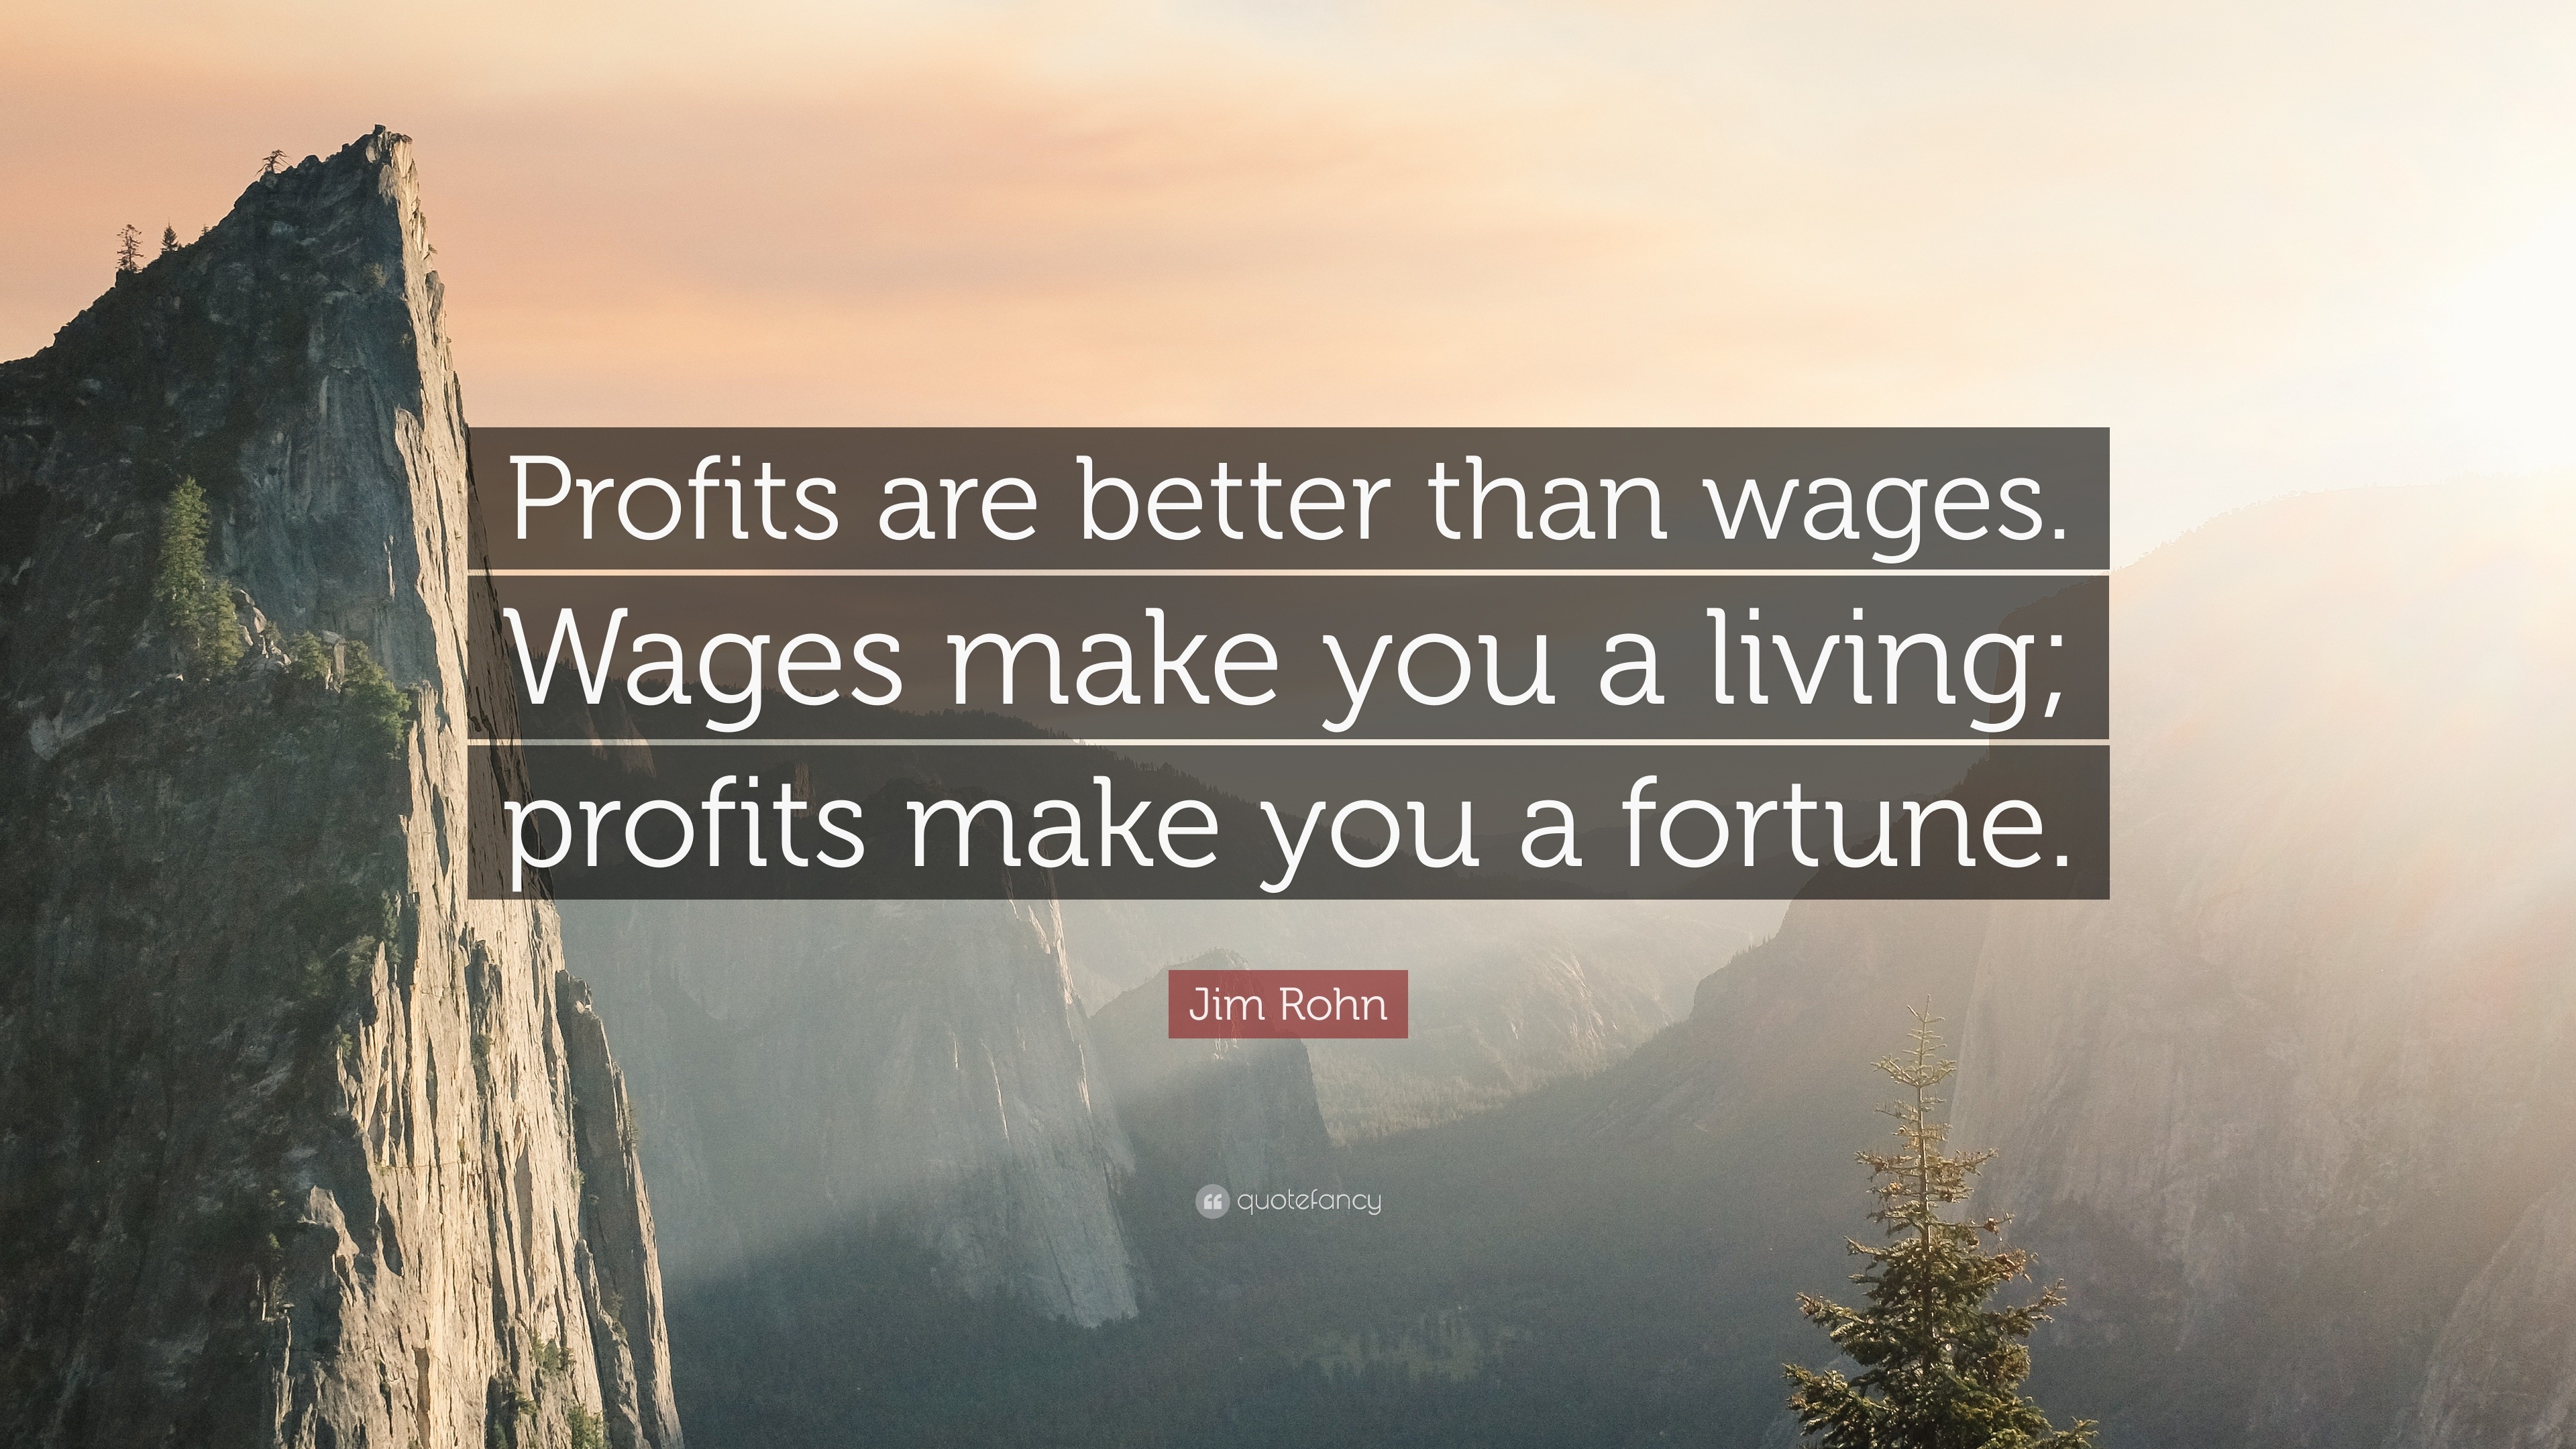 Jim Rohn Quote: "Profits are better than wages. Wages make ...